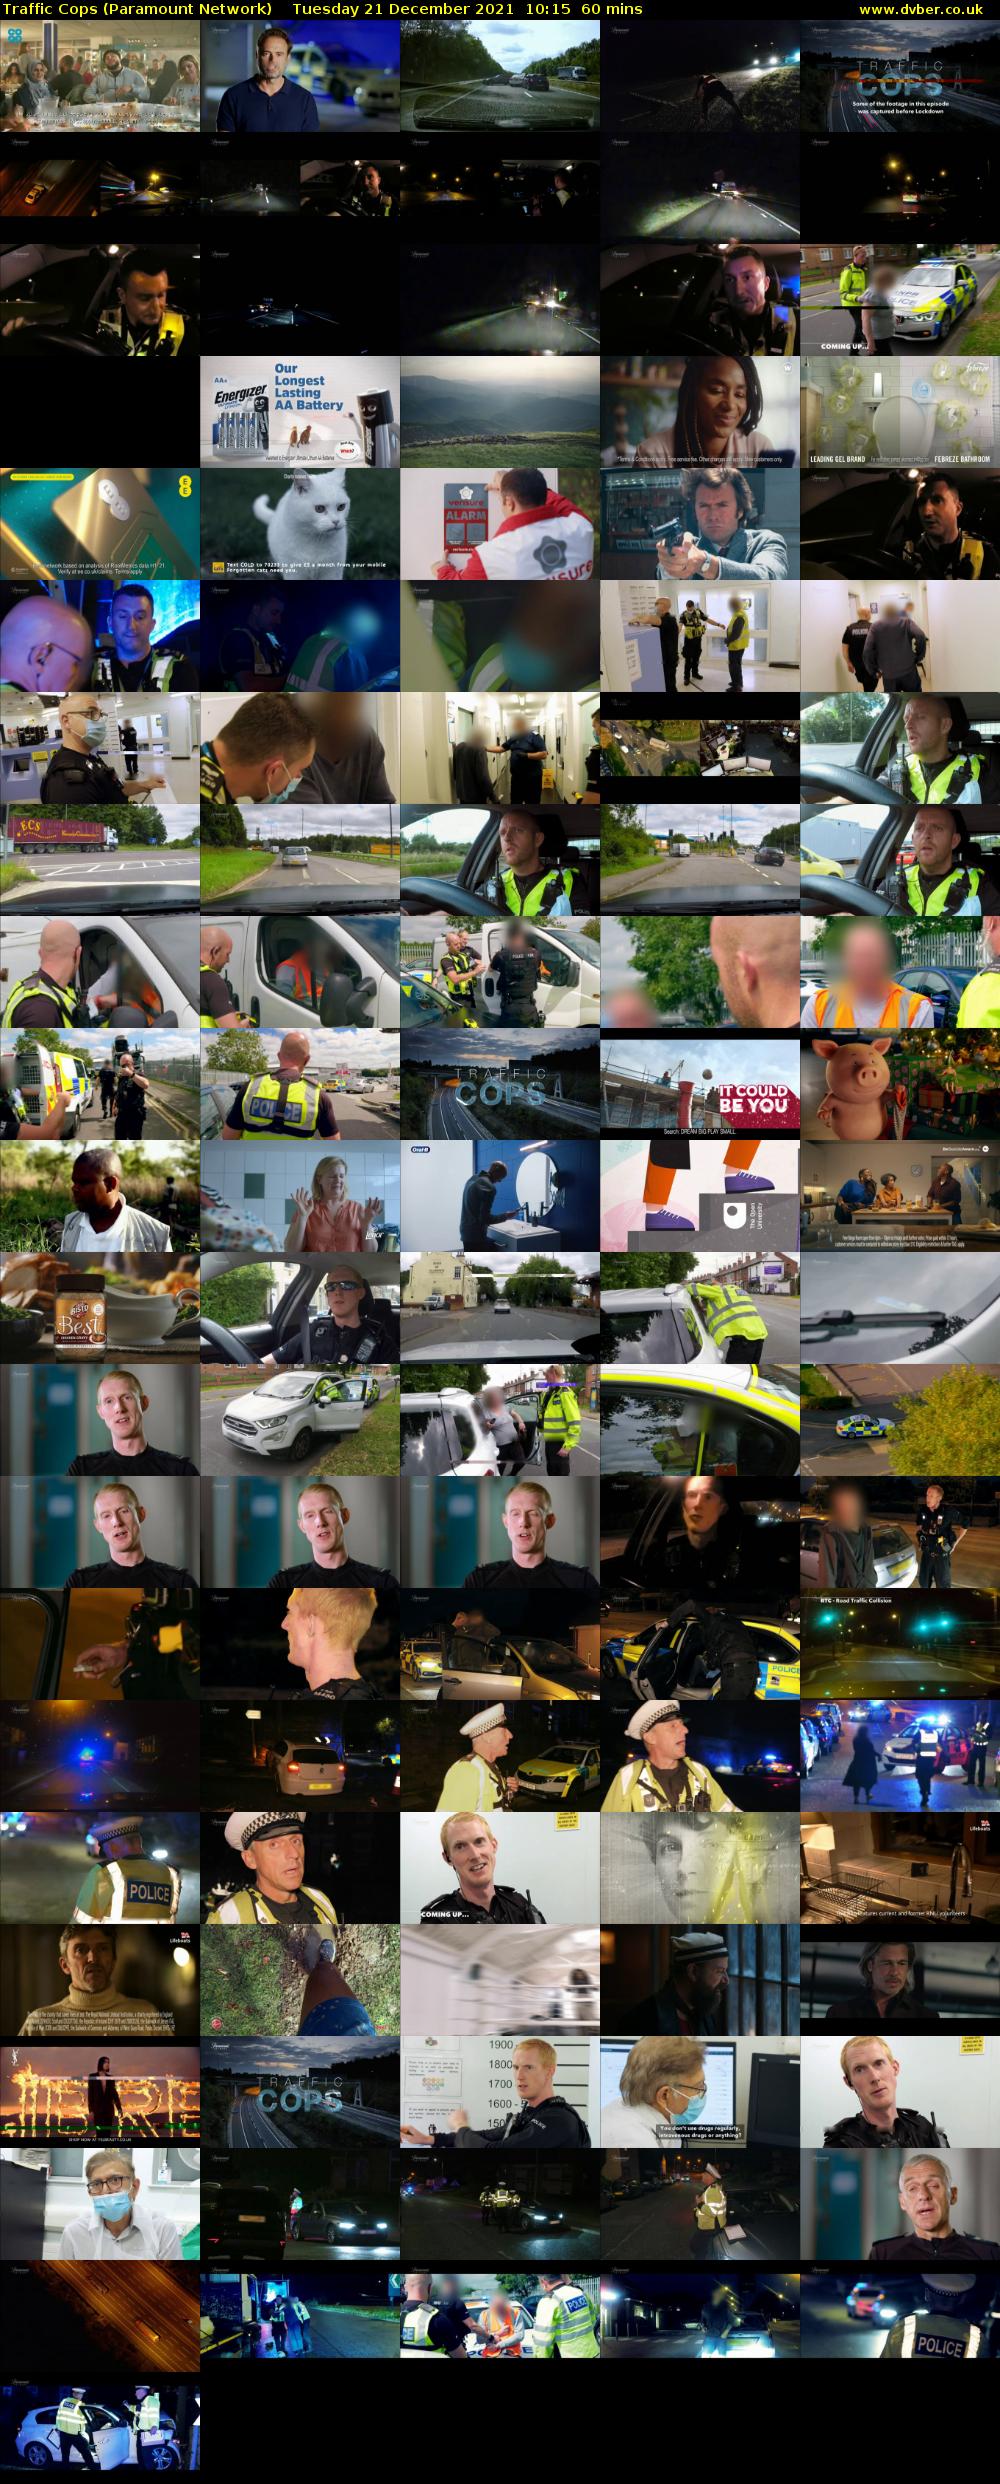 Traffic Cops (Paramount Network) Tuesday 21 December 2021 10:15 - 11:15